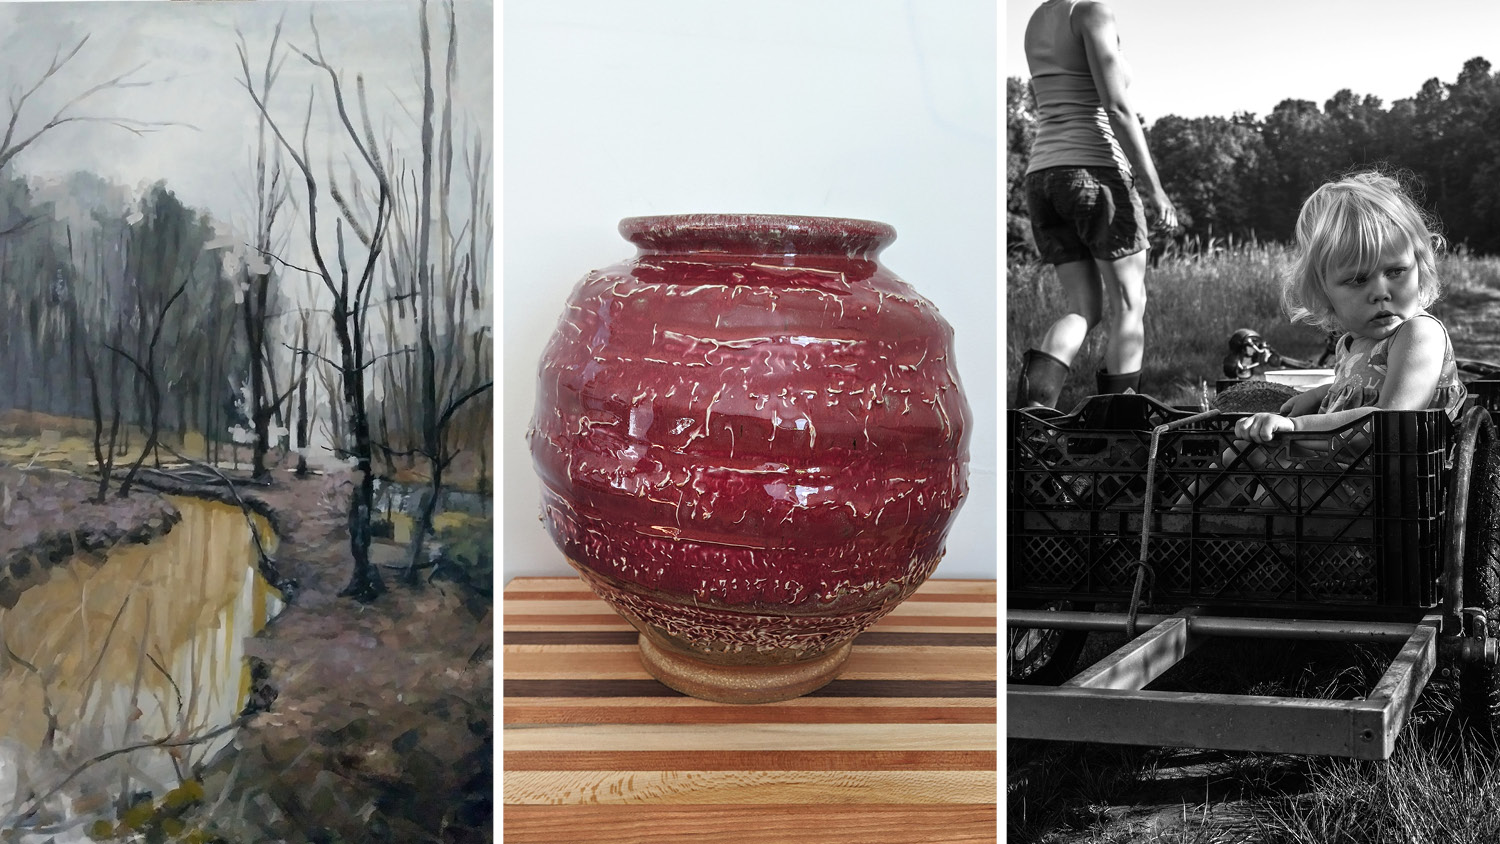 2020 Arts NC State Visual Artist Award winners (L-R): “Der Fall” by Jornell Bacon, ribbed vase by Jake Goodnight, “Farm Kid” by Grayson Morrow. Links to the full images are available in the text.